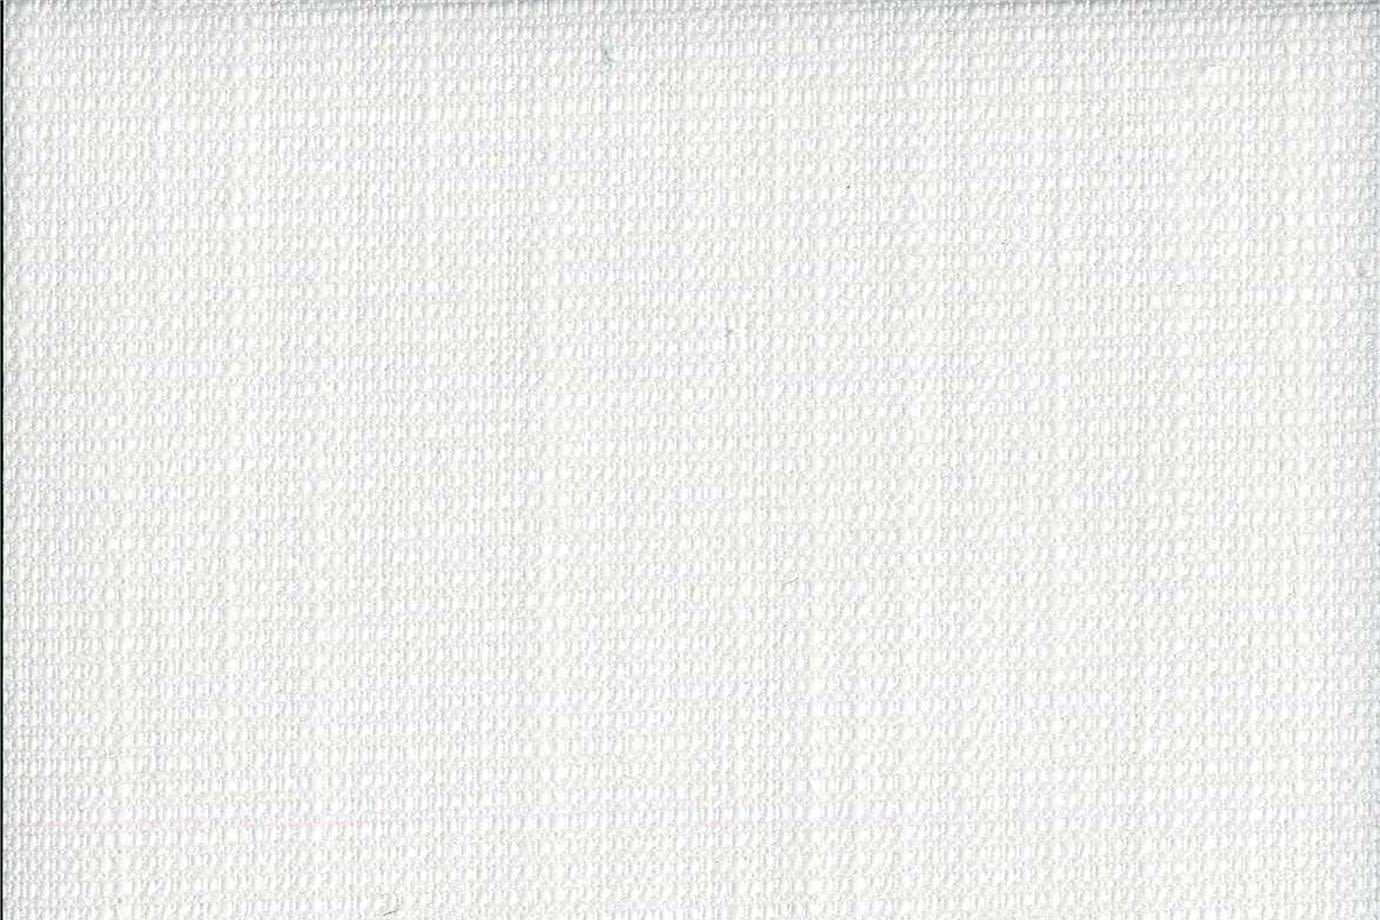 J2837 CANNETTE 001 Bianco home decoration fabric